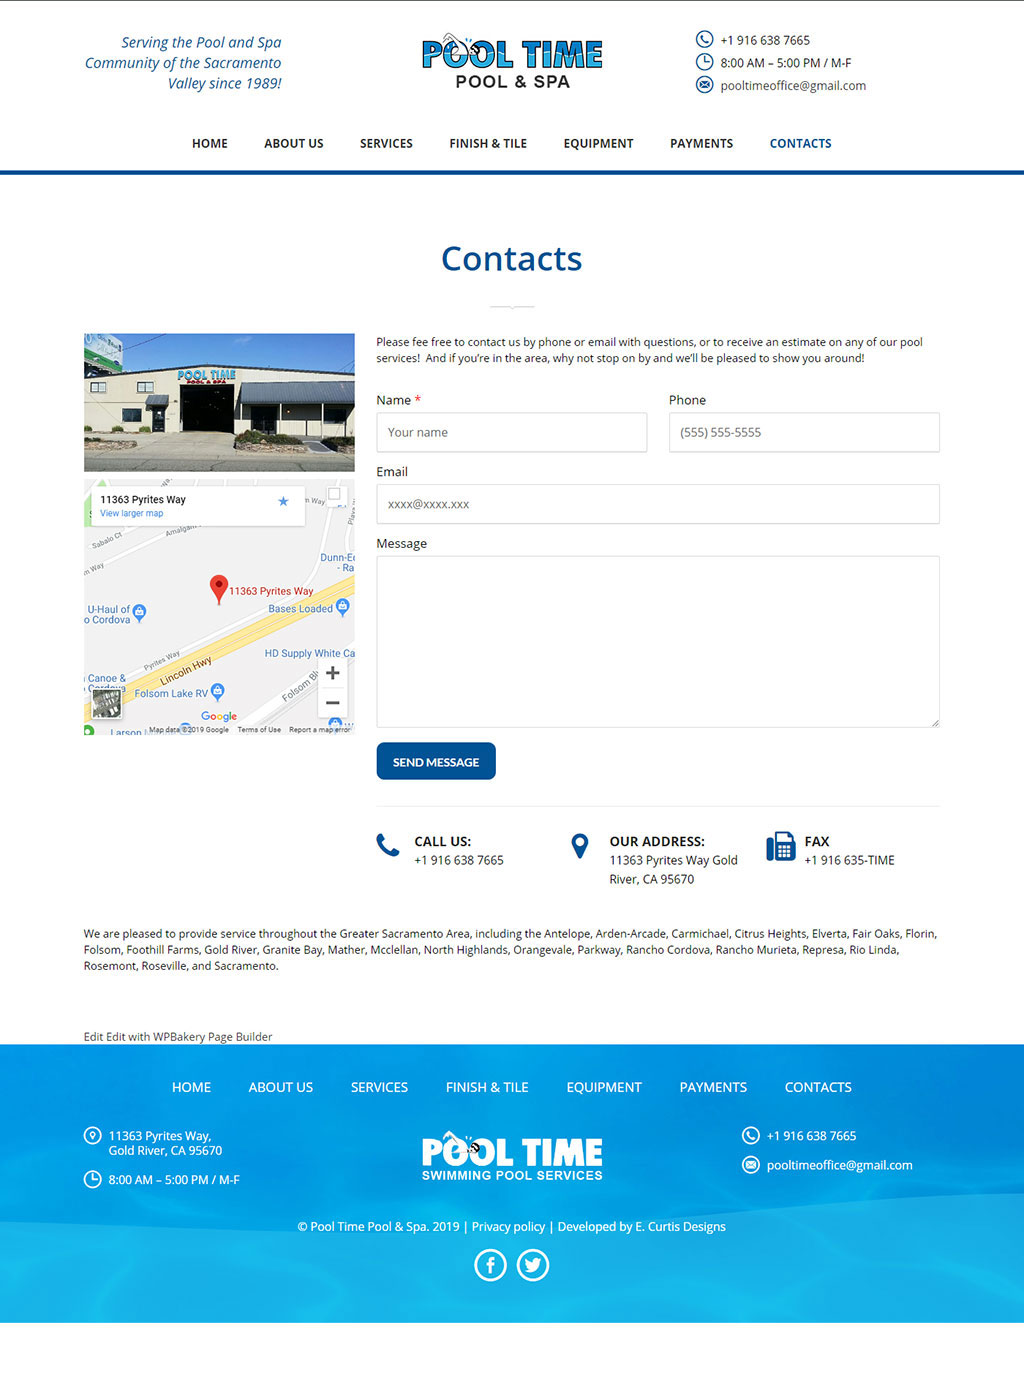 Contact page developed for Sacramento pool and spa contractors